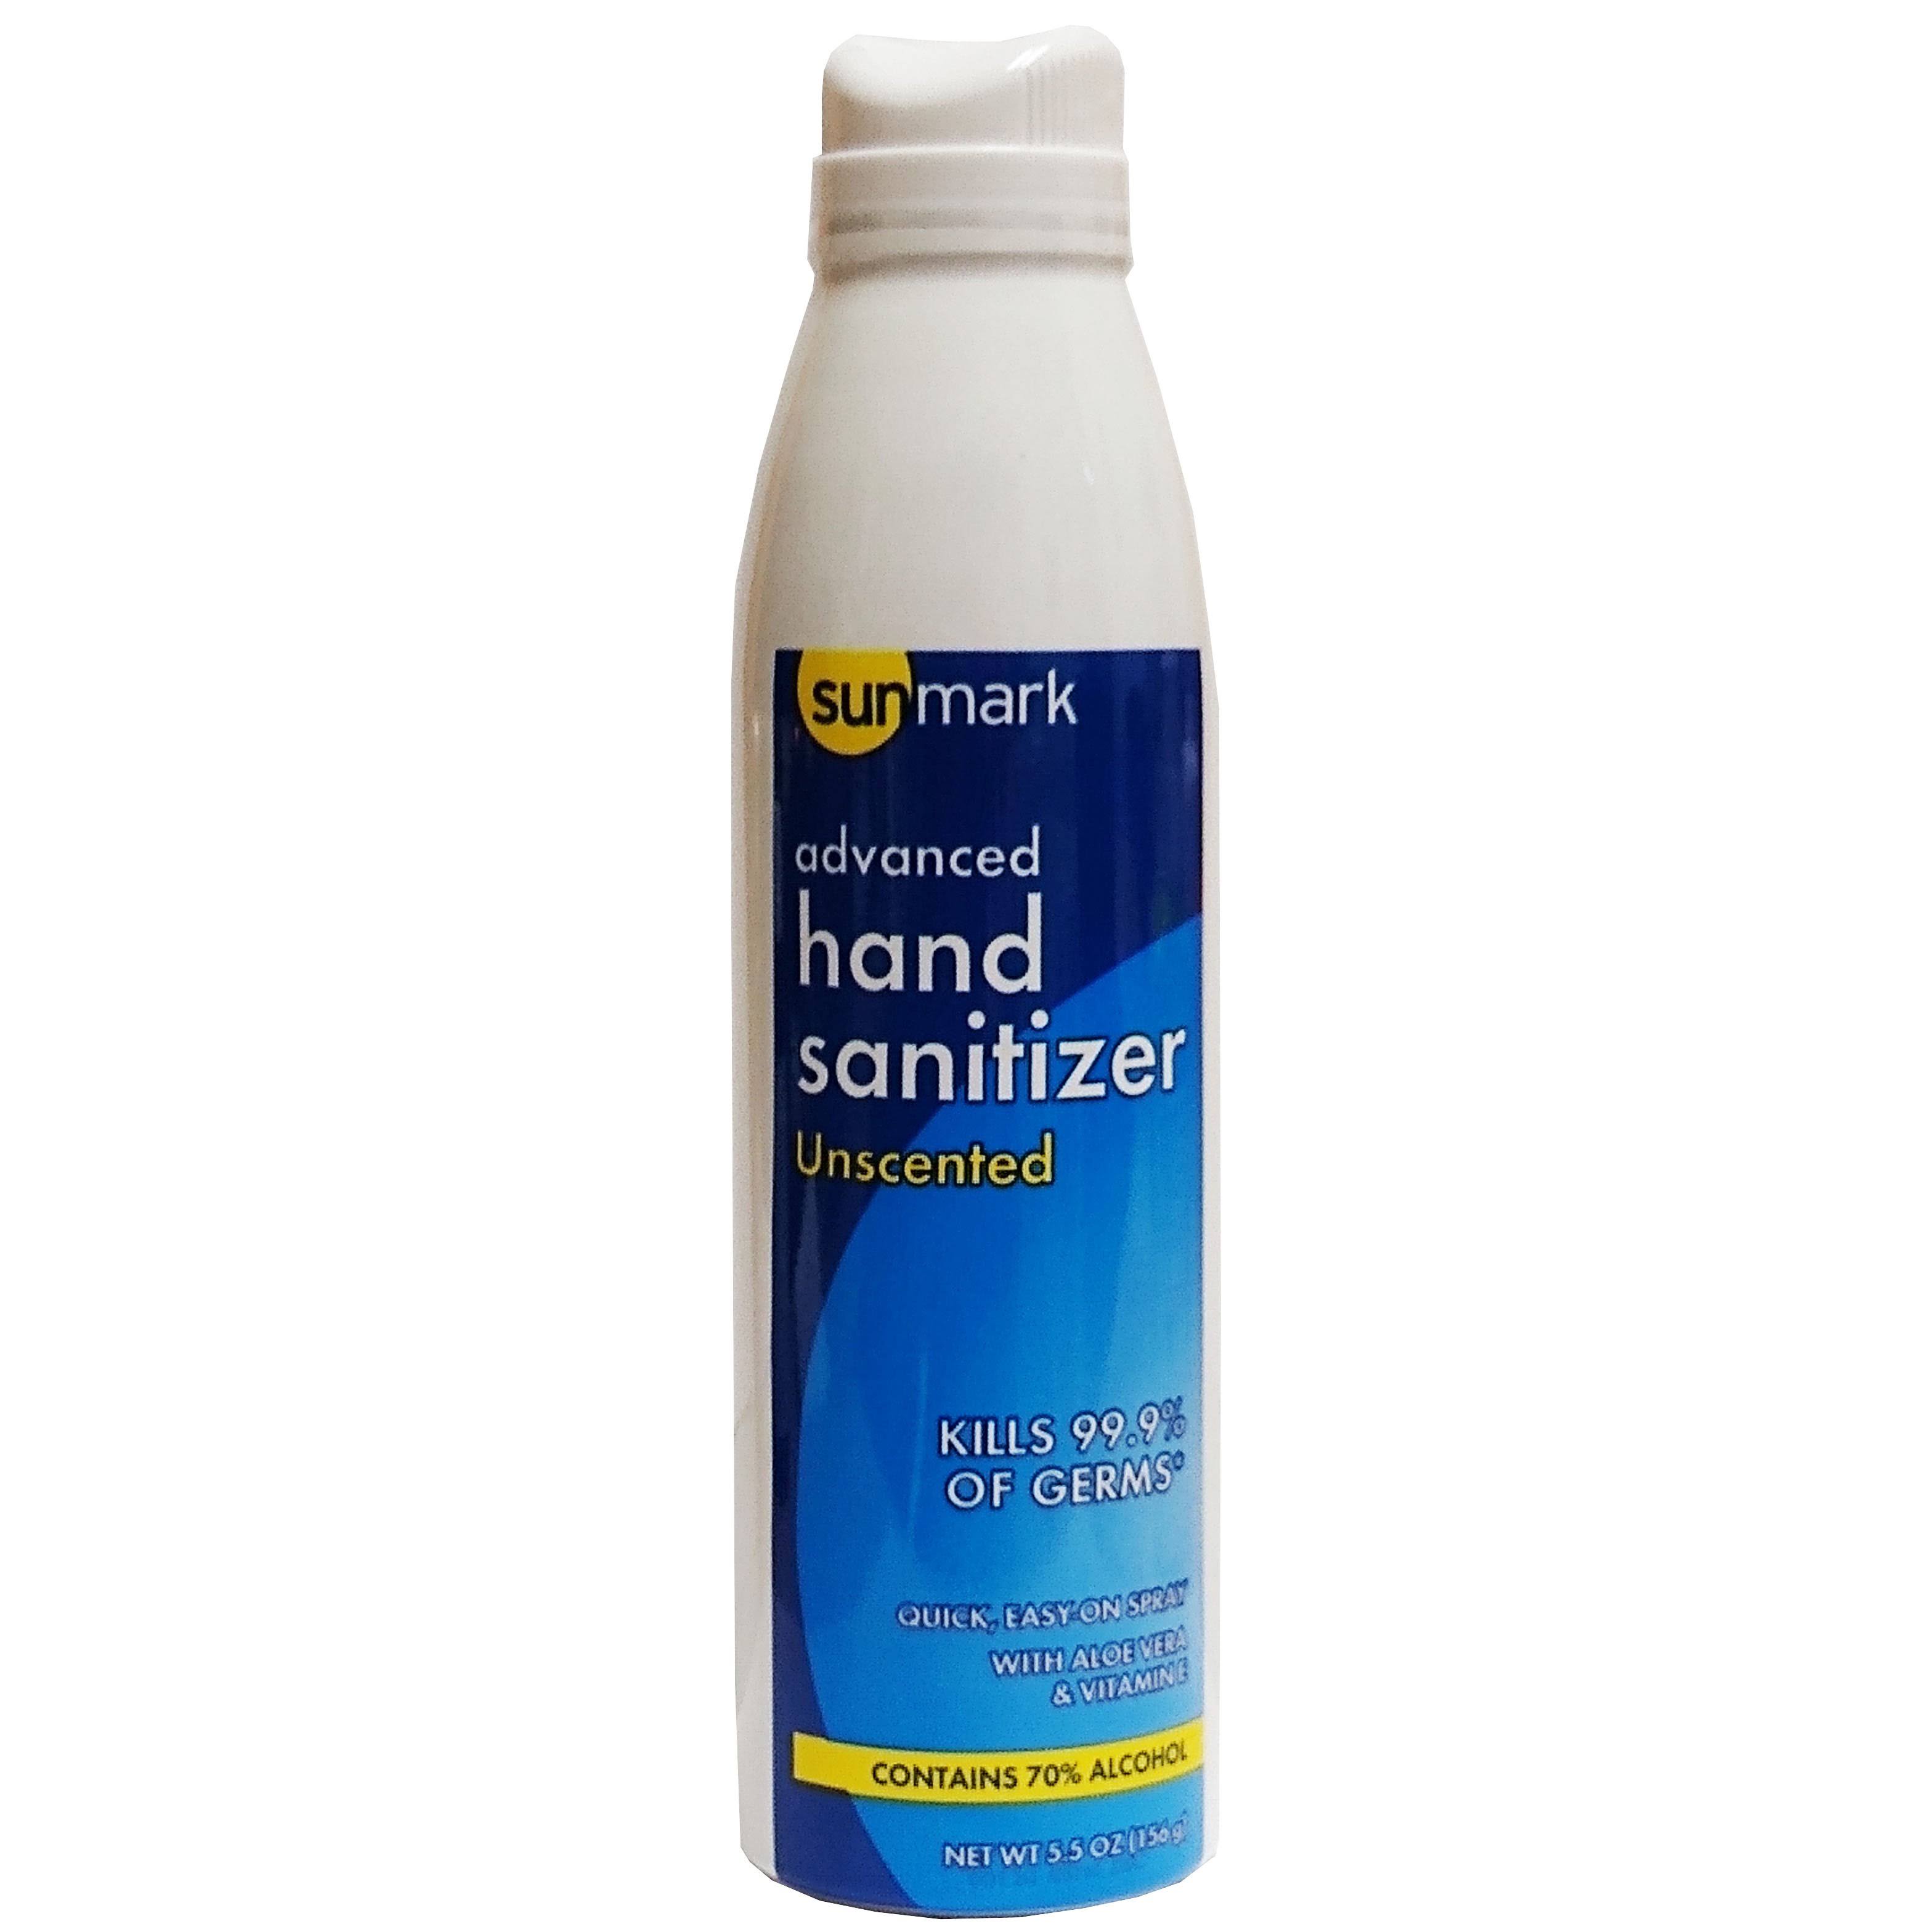 Sunmark Advanced Hand Sanitizer Unscented 70% Alcohol 5.5 oz, 1 Each, by Sunmark